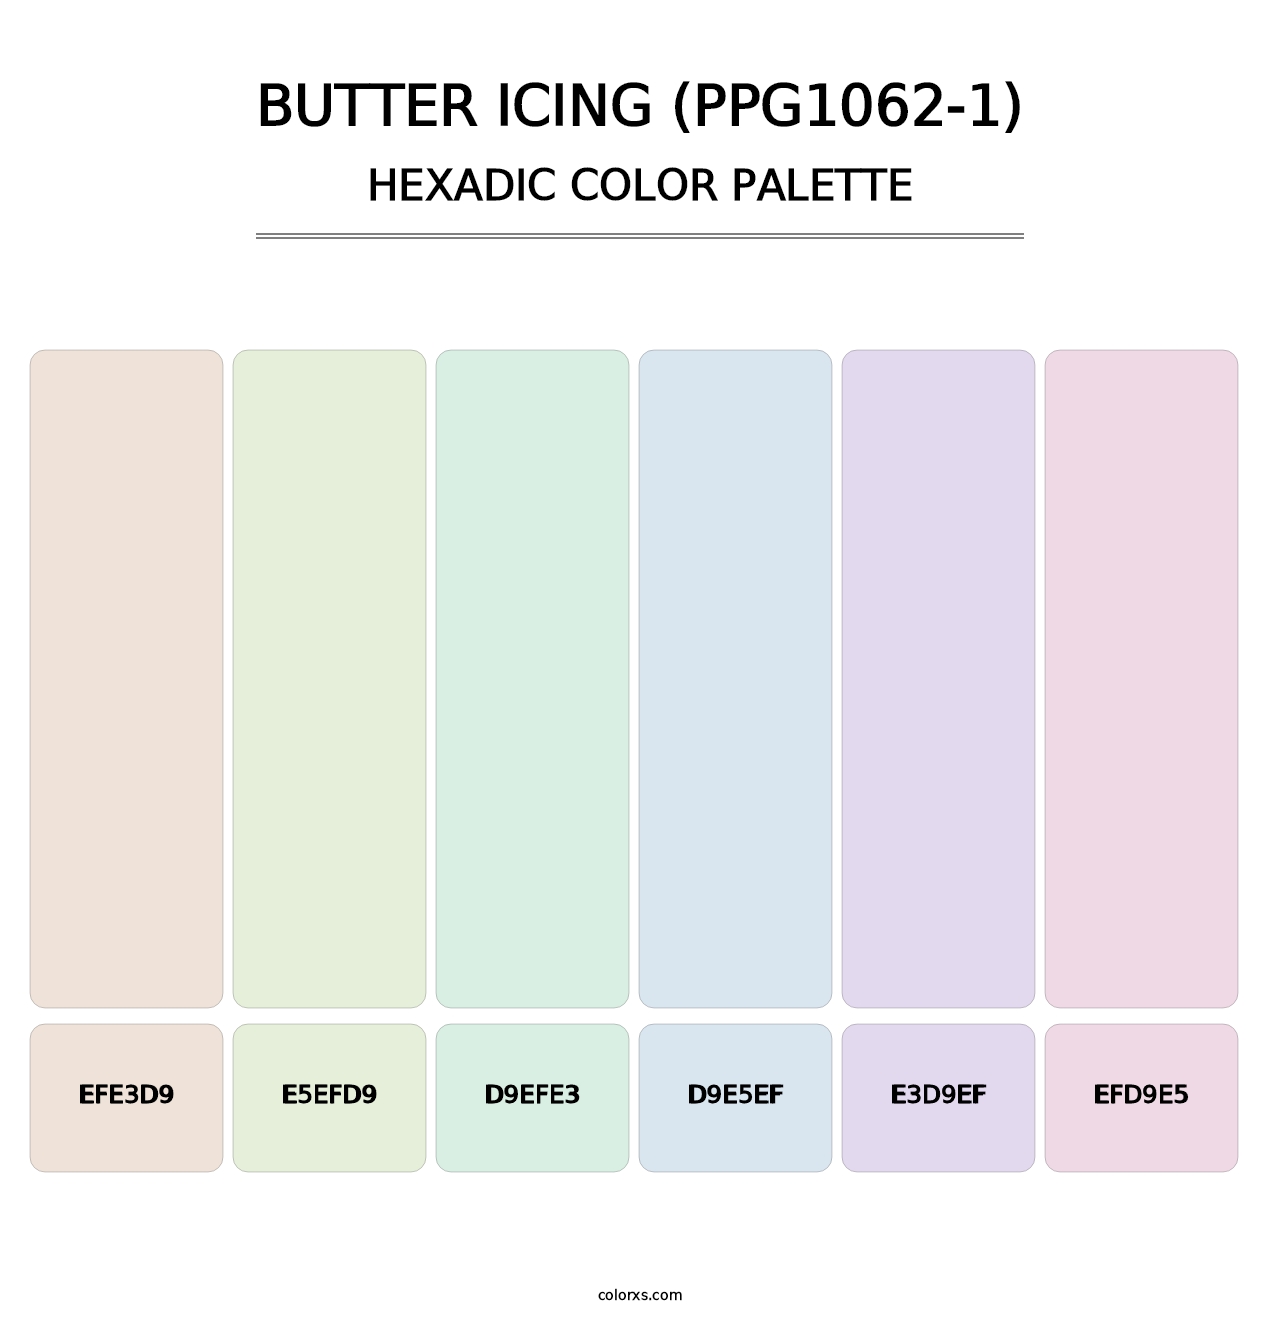 Butter Icing (PPG1062-1) - Hexadic Color Palette